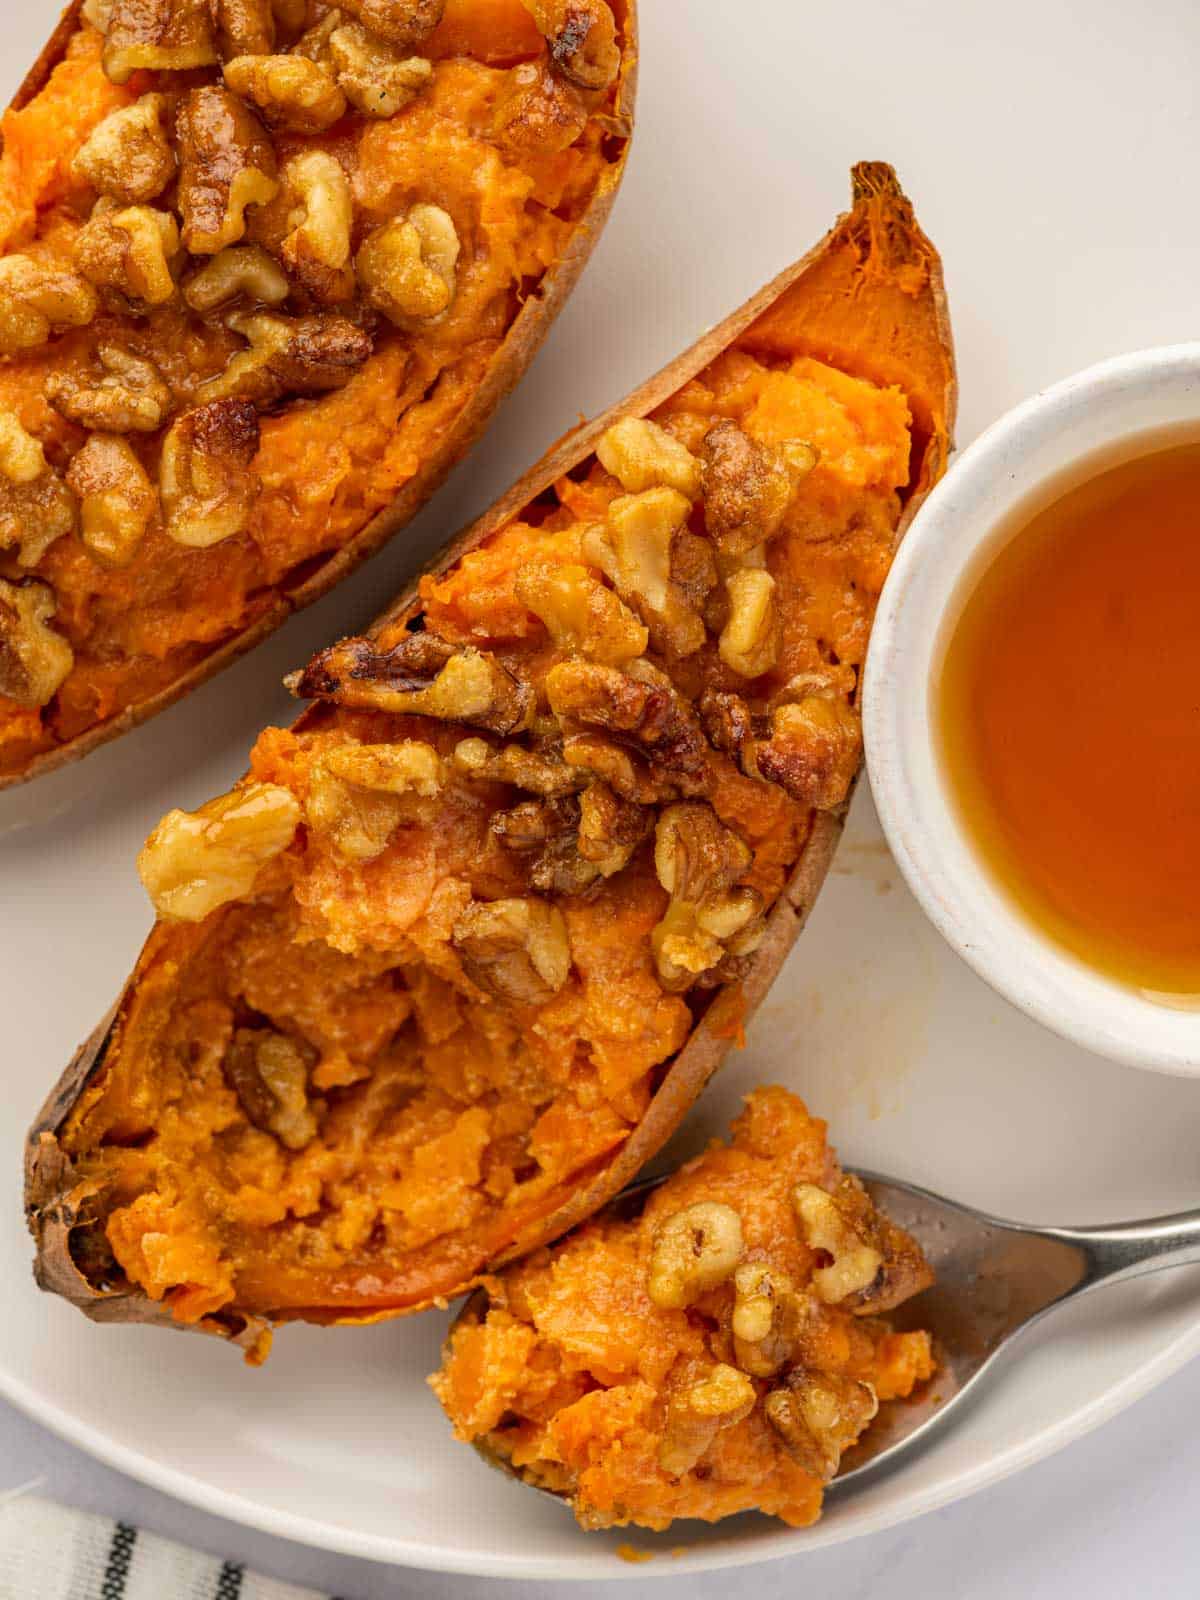 A spoon scoops a bite of sweet potatoes.